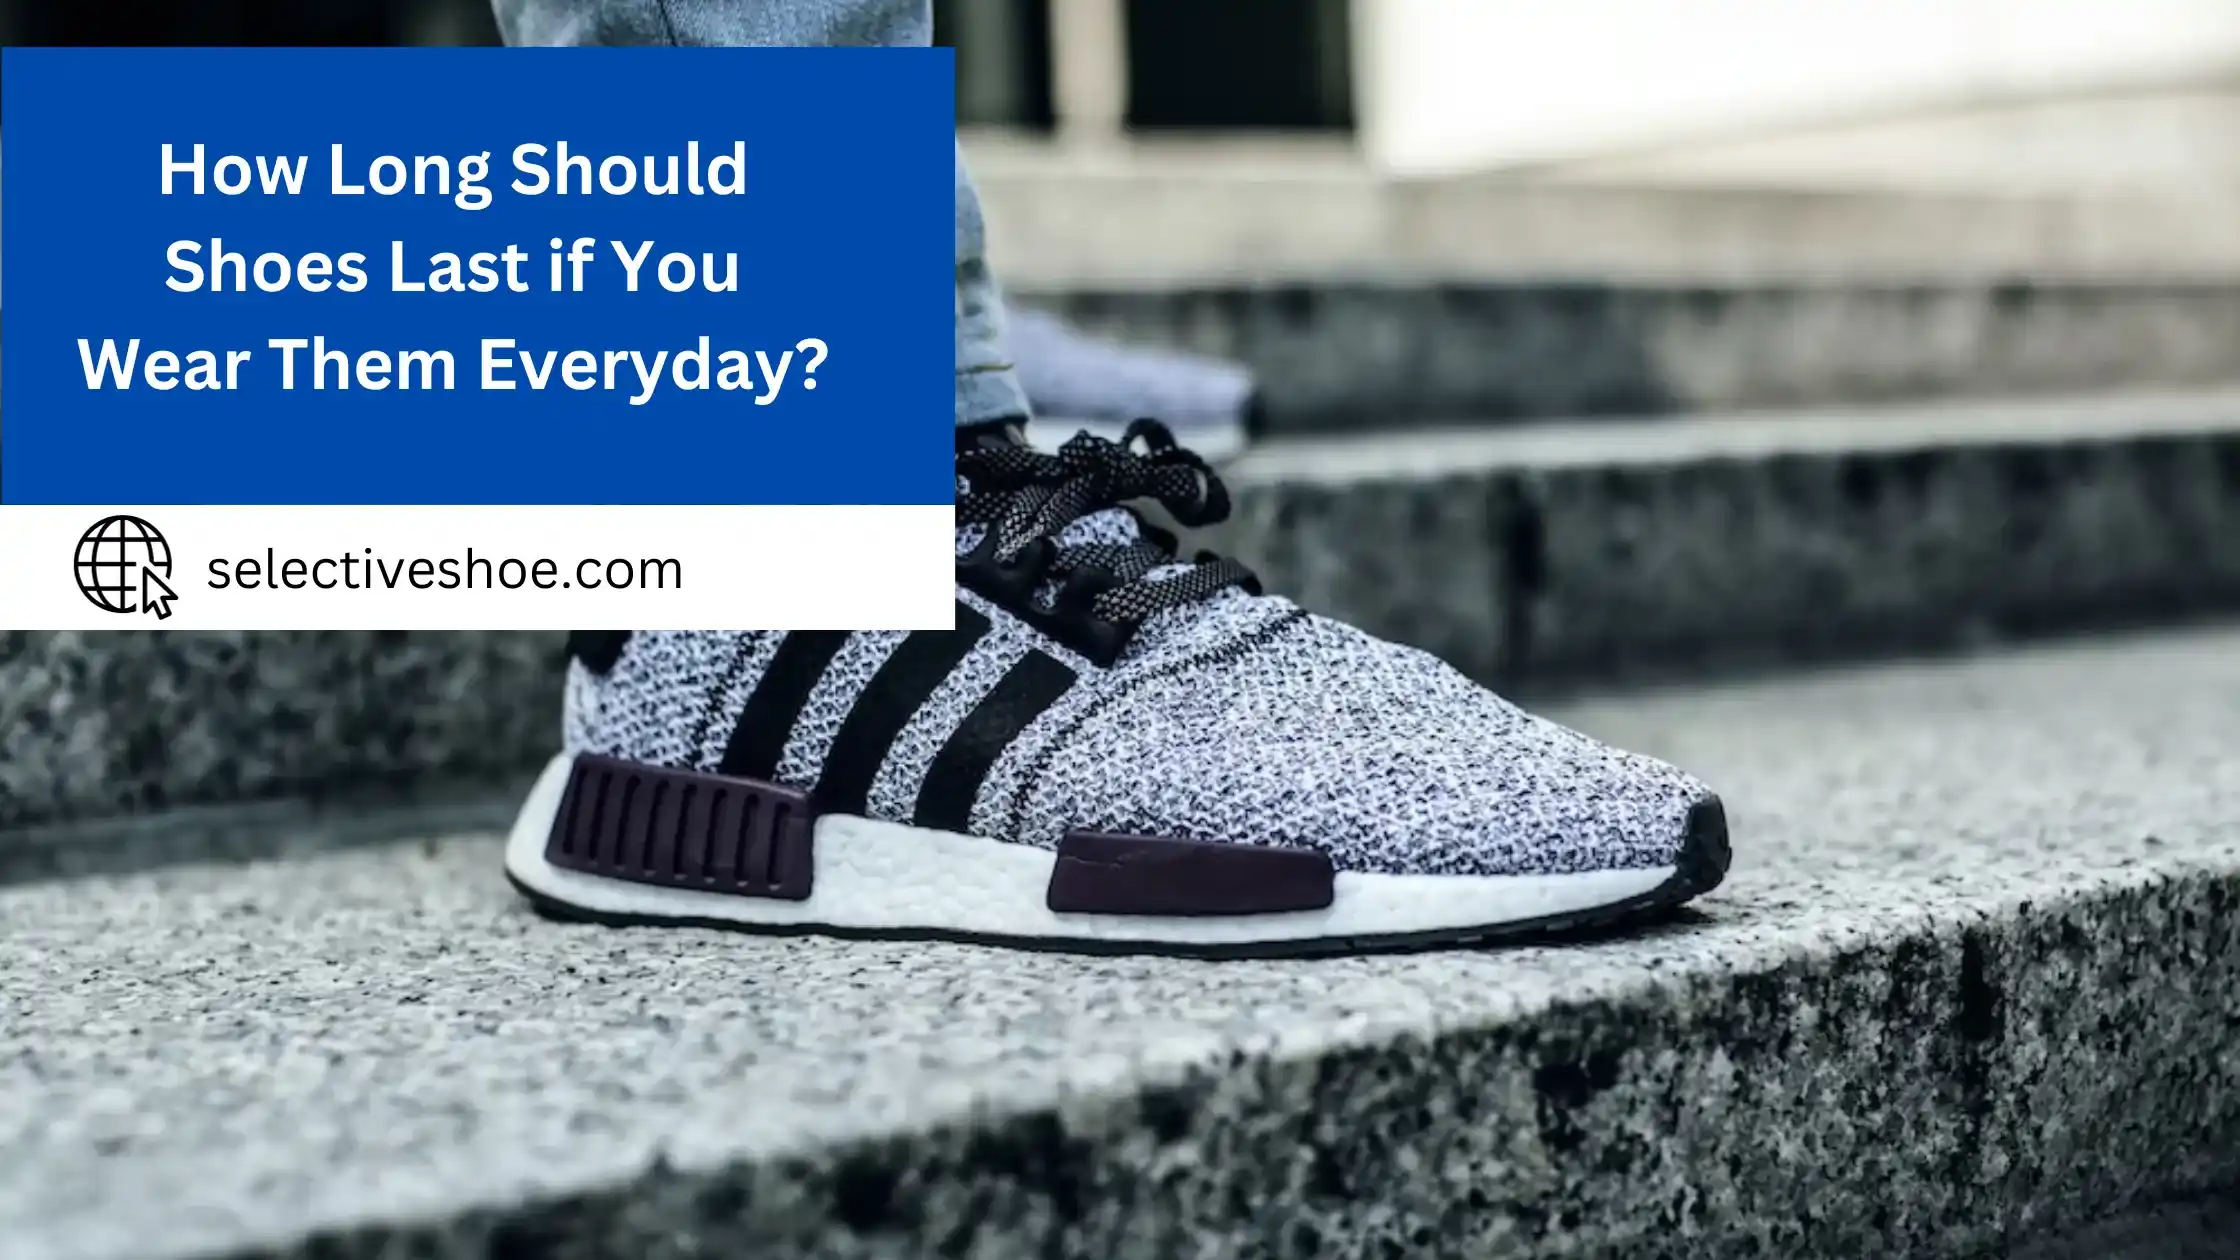 How Long Should Shoes Last if You Wear Them Everyday?